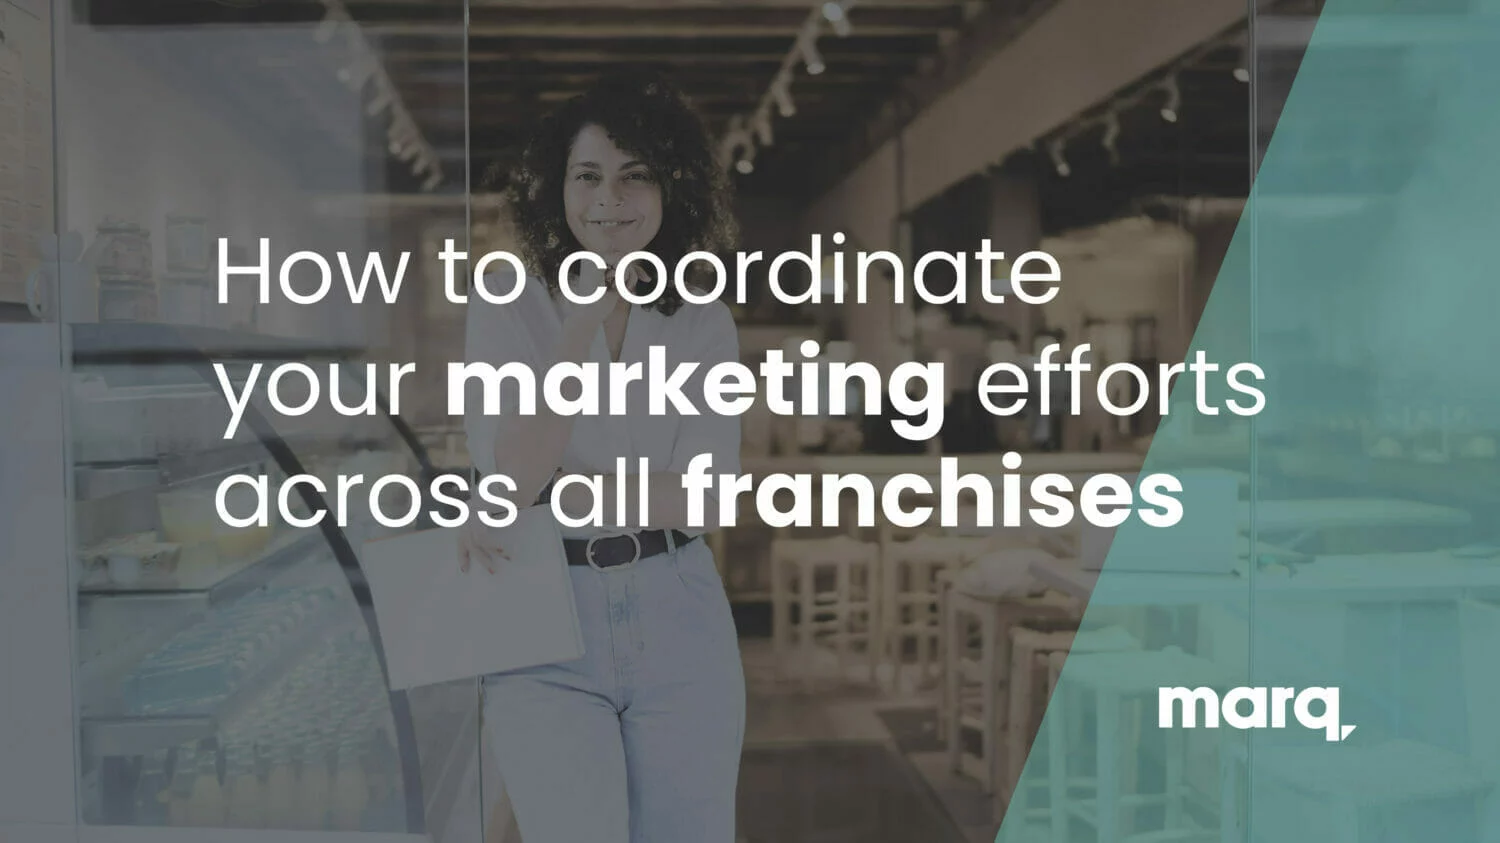 7 tips to coordinate local & national franchise marketing